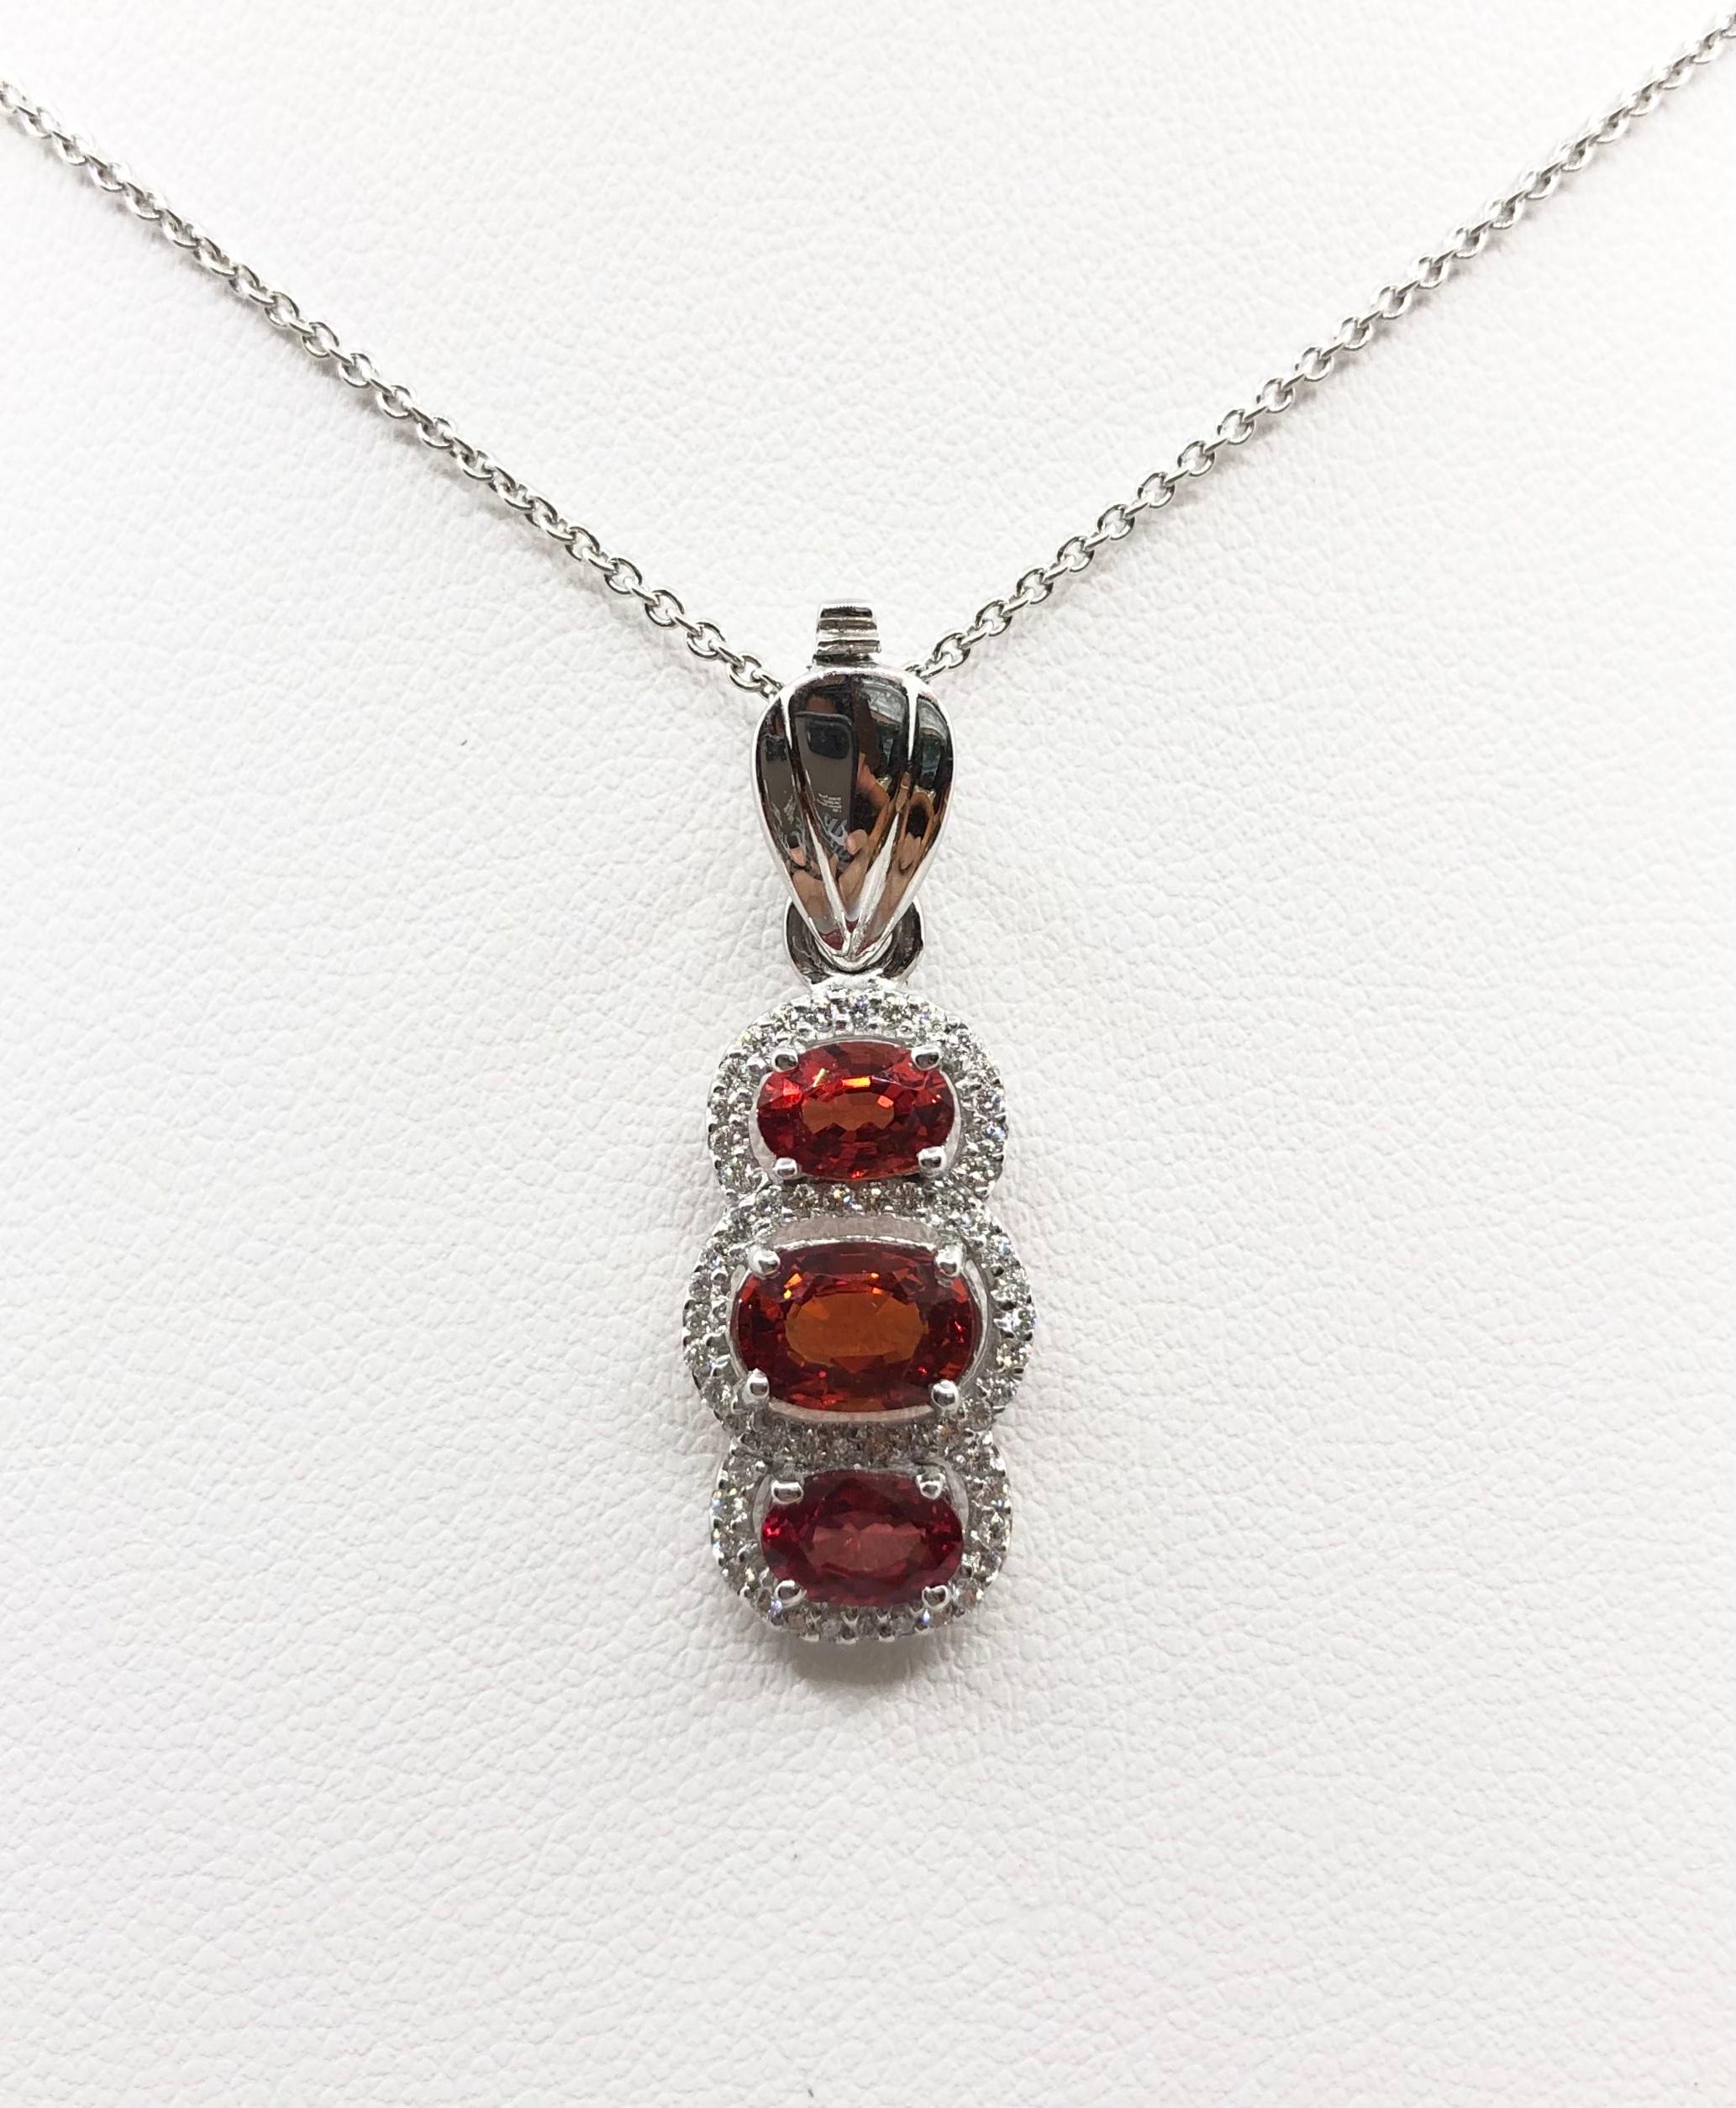 Orange Sapphire 2.54 carats with Diamond 0.24 carat Pendant set in 18 Karat White Gold Settings
(chain not included)

Width: 1.0 cm 
Length: 3.2 cm
Total Weight: 4.35 grams

